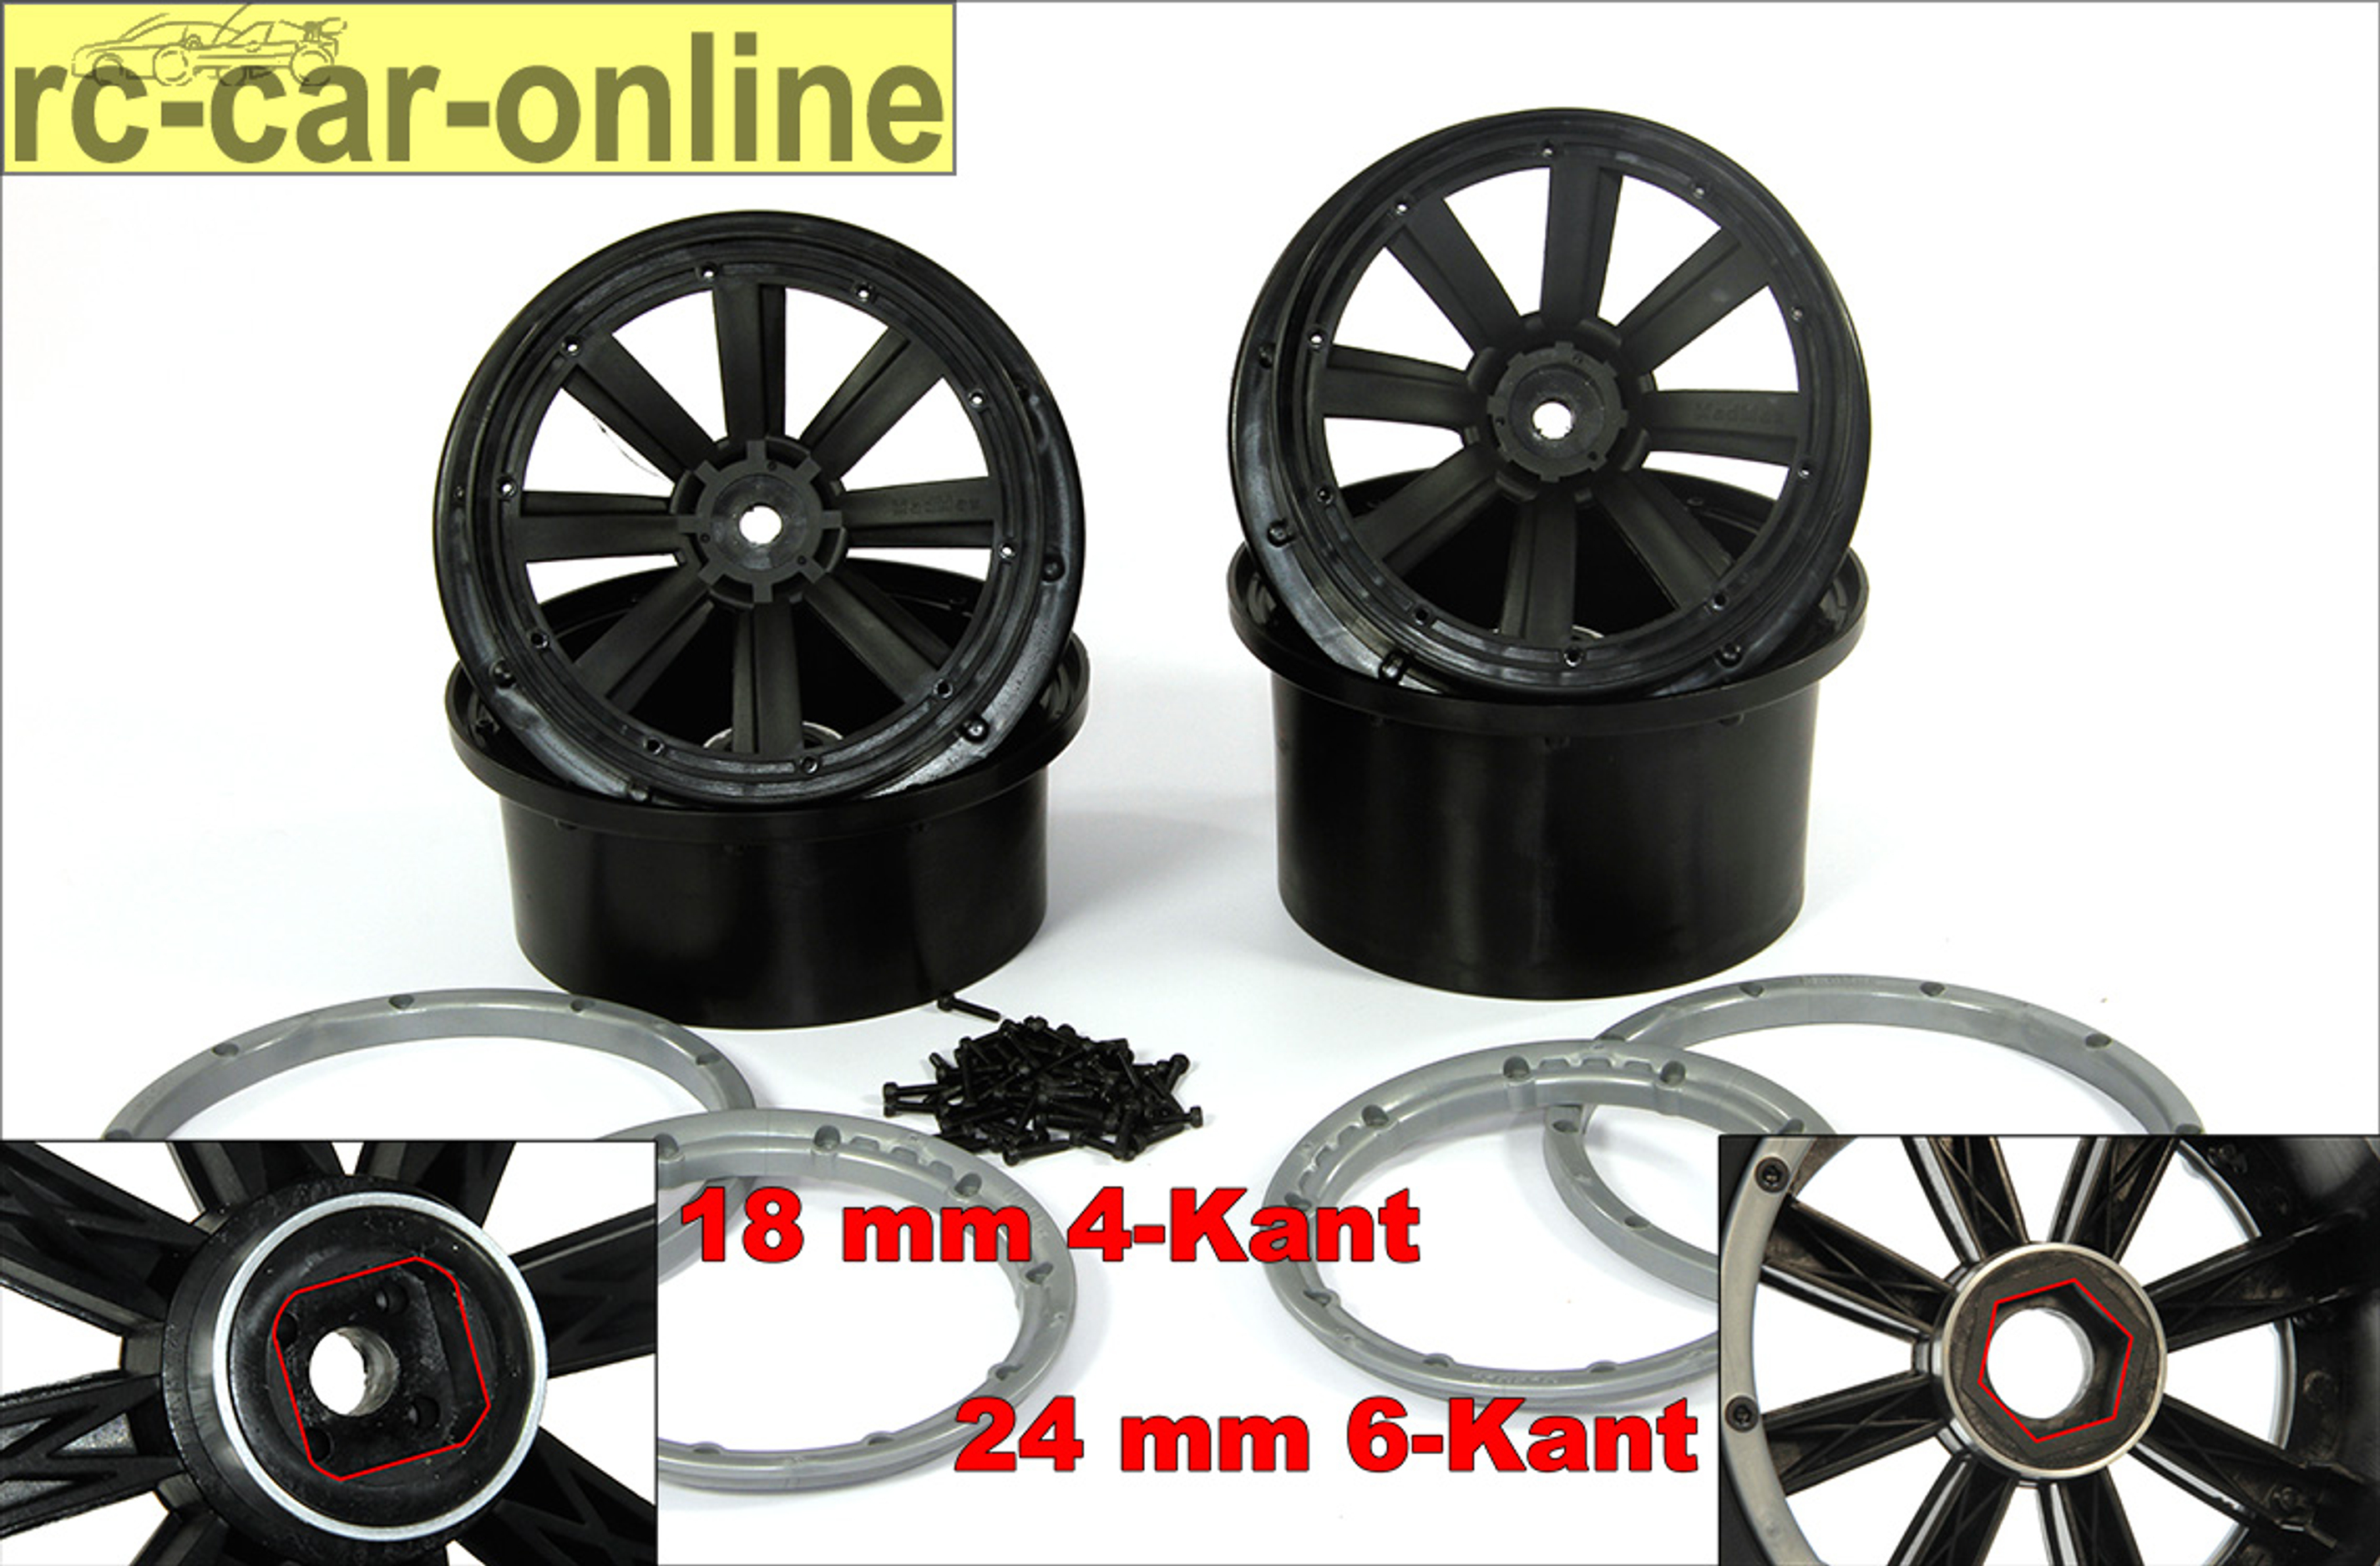 y1415 MadMax Extreme 60/80 mm rim black with 18 mm or 24 mm drive wheel drives